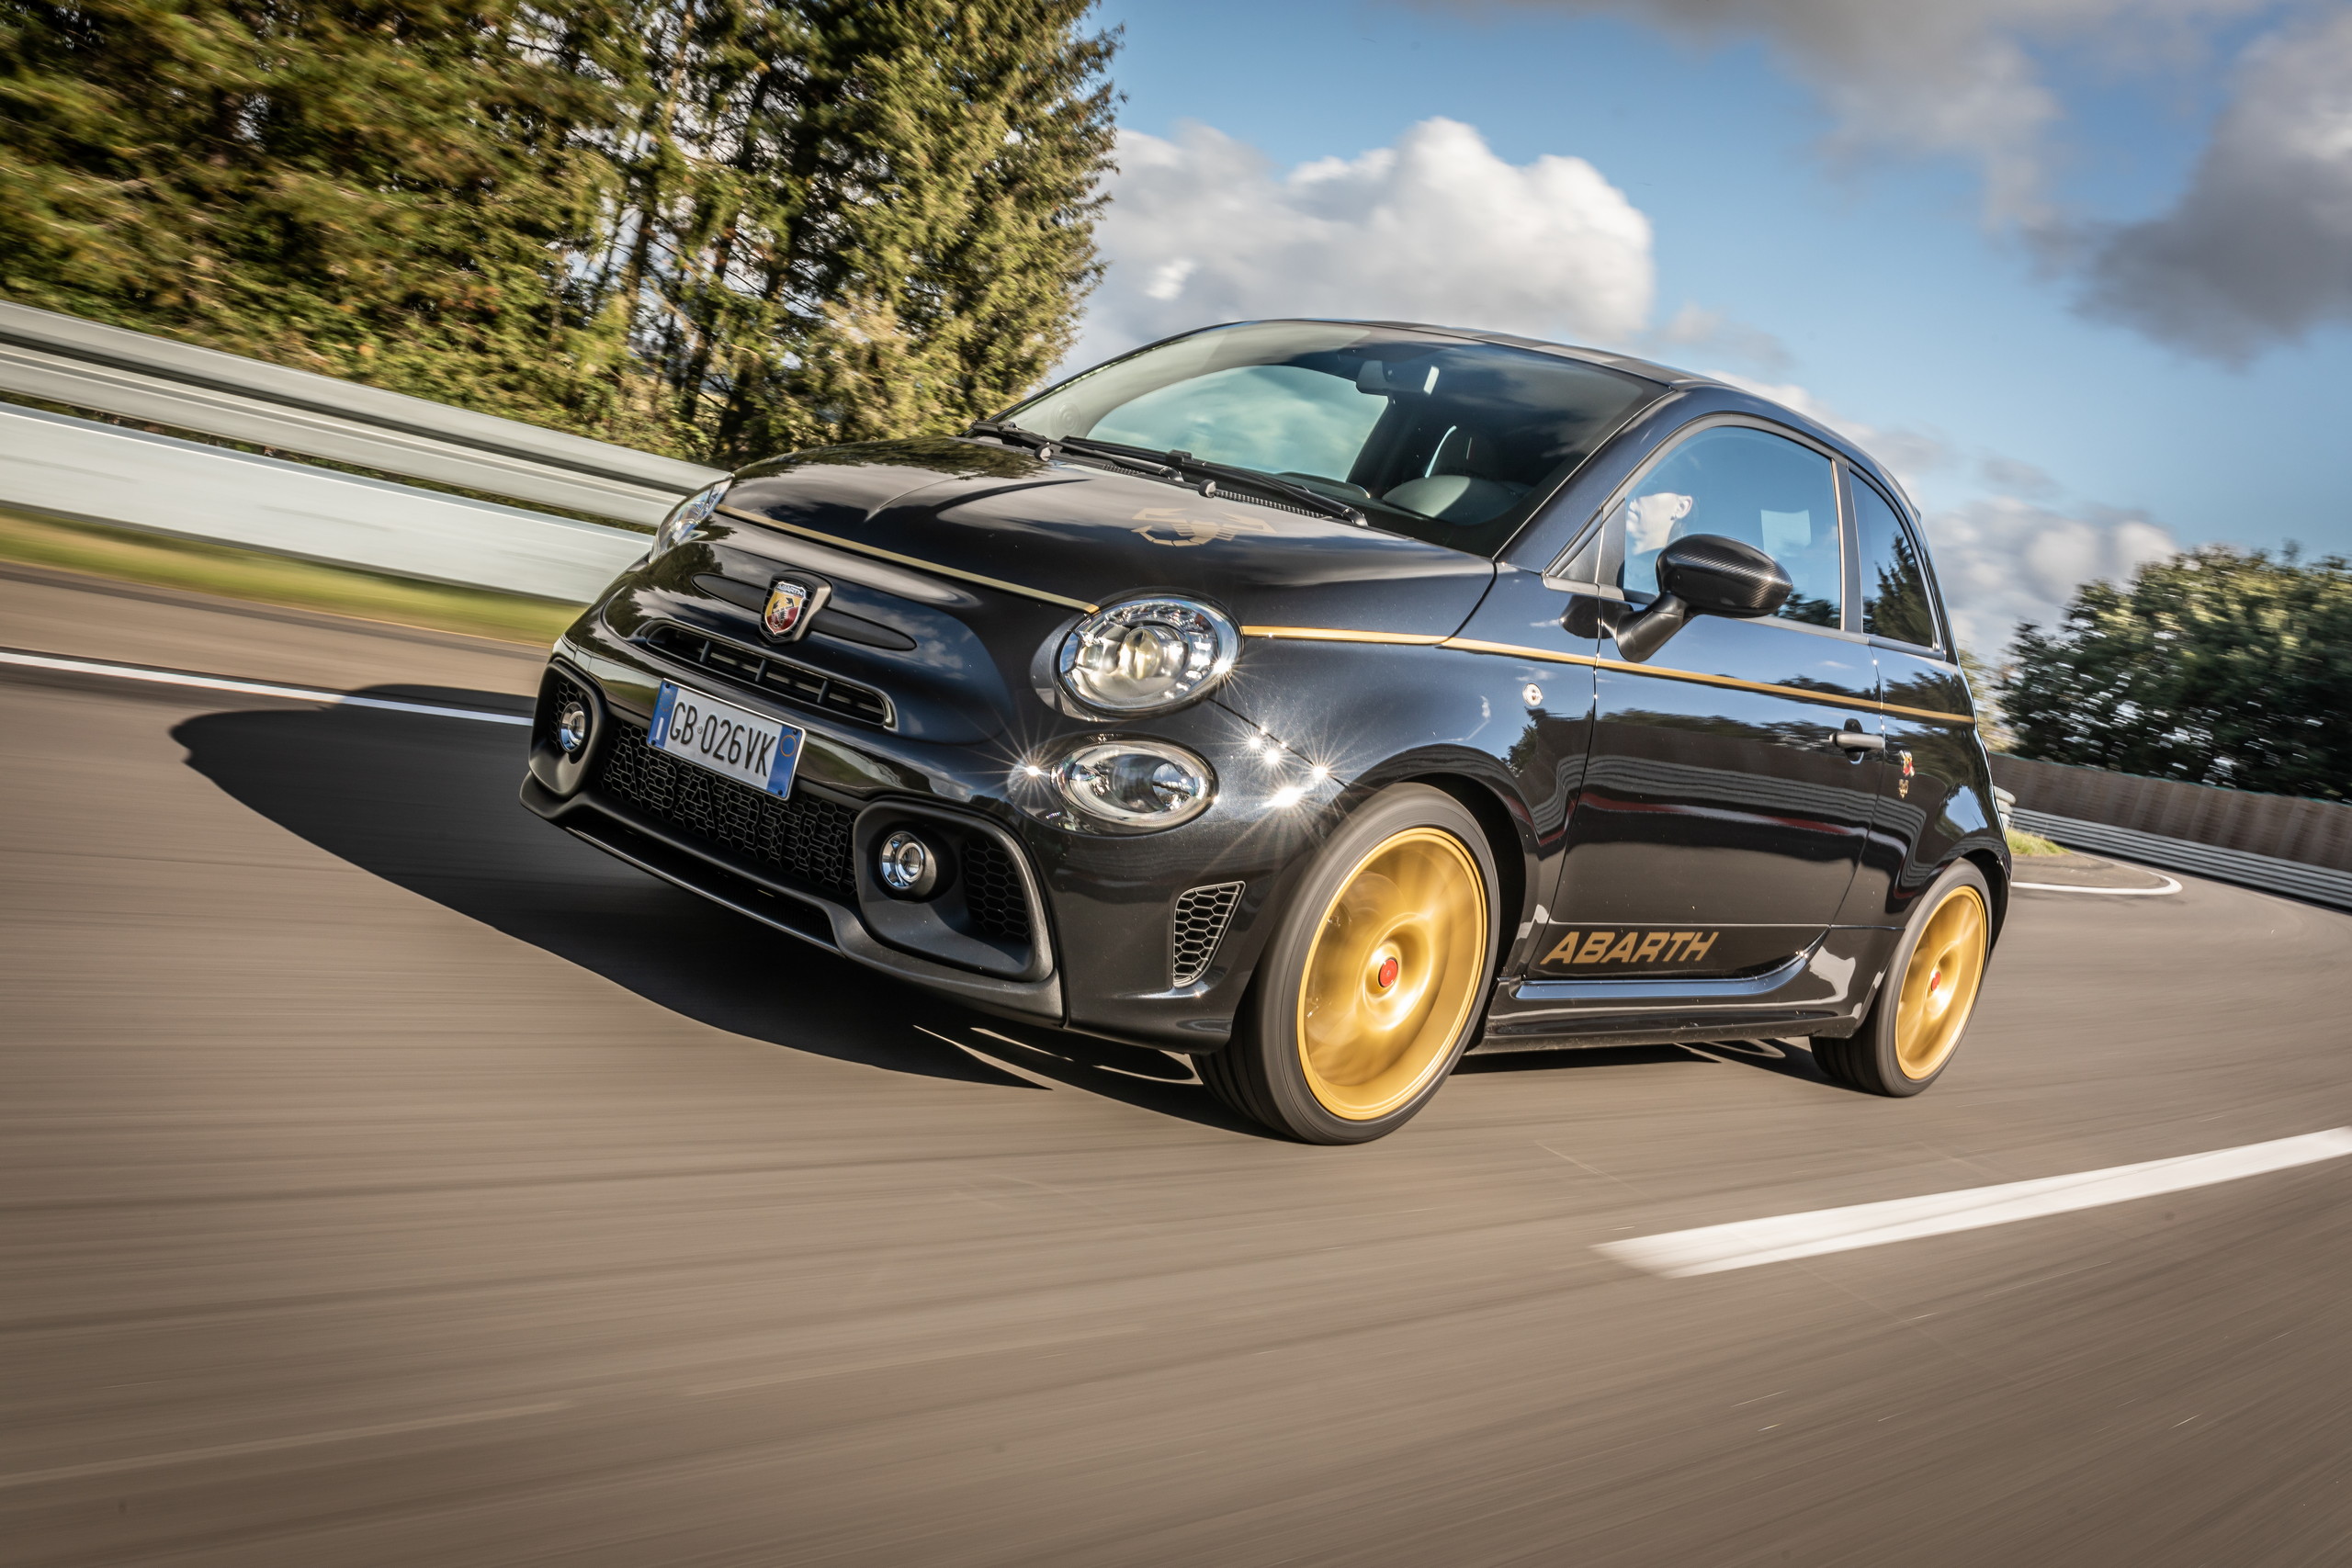 https://s1.cdn.autoevolution.com/images/news/2021-abarth-595-scorpioneoro-is-a-limited-affair-tiny-hot-hatch-166603_1.jpg